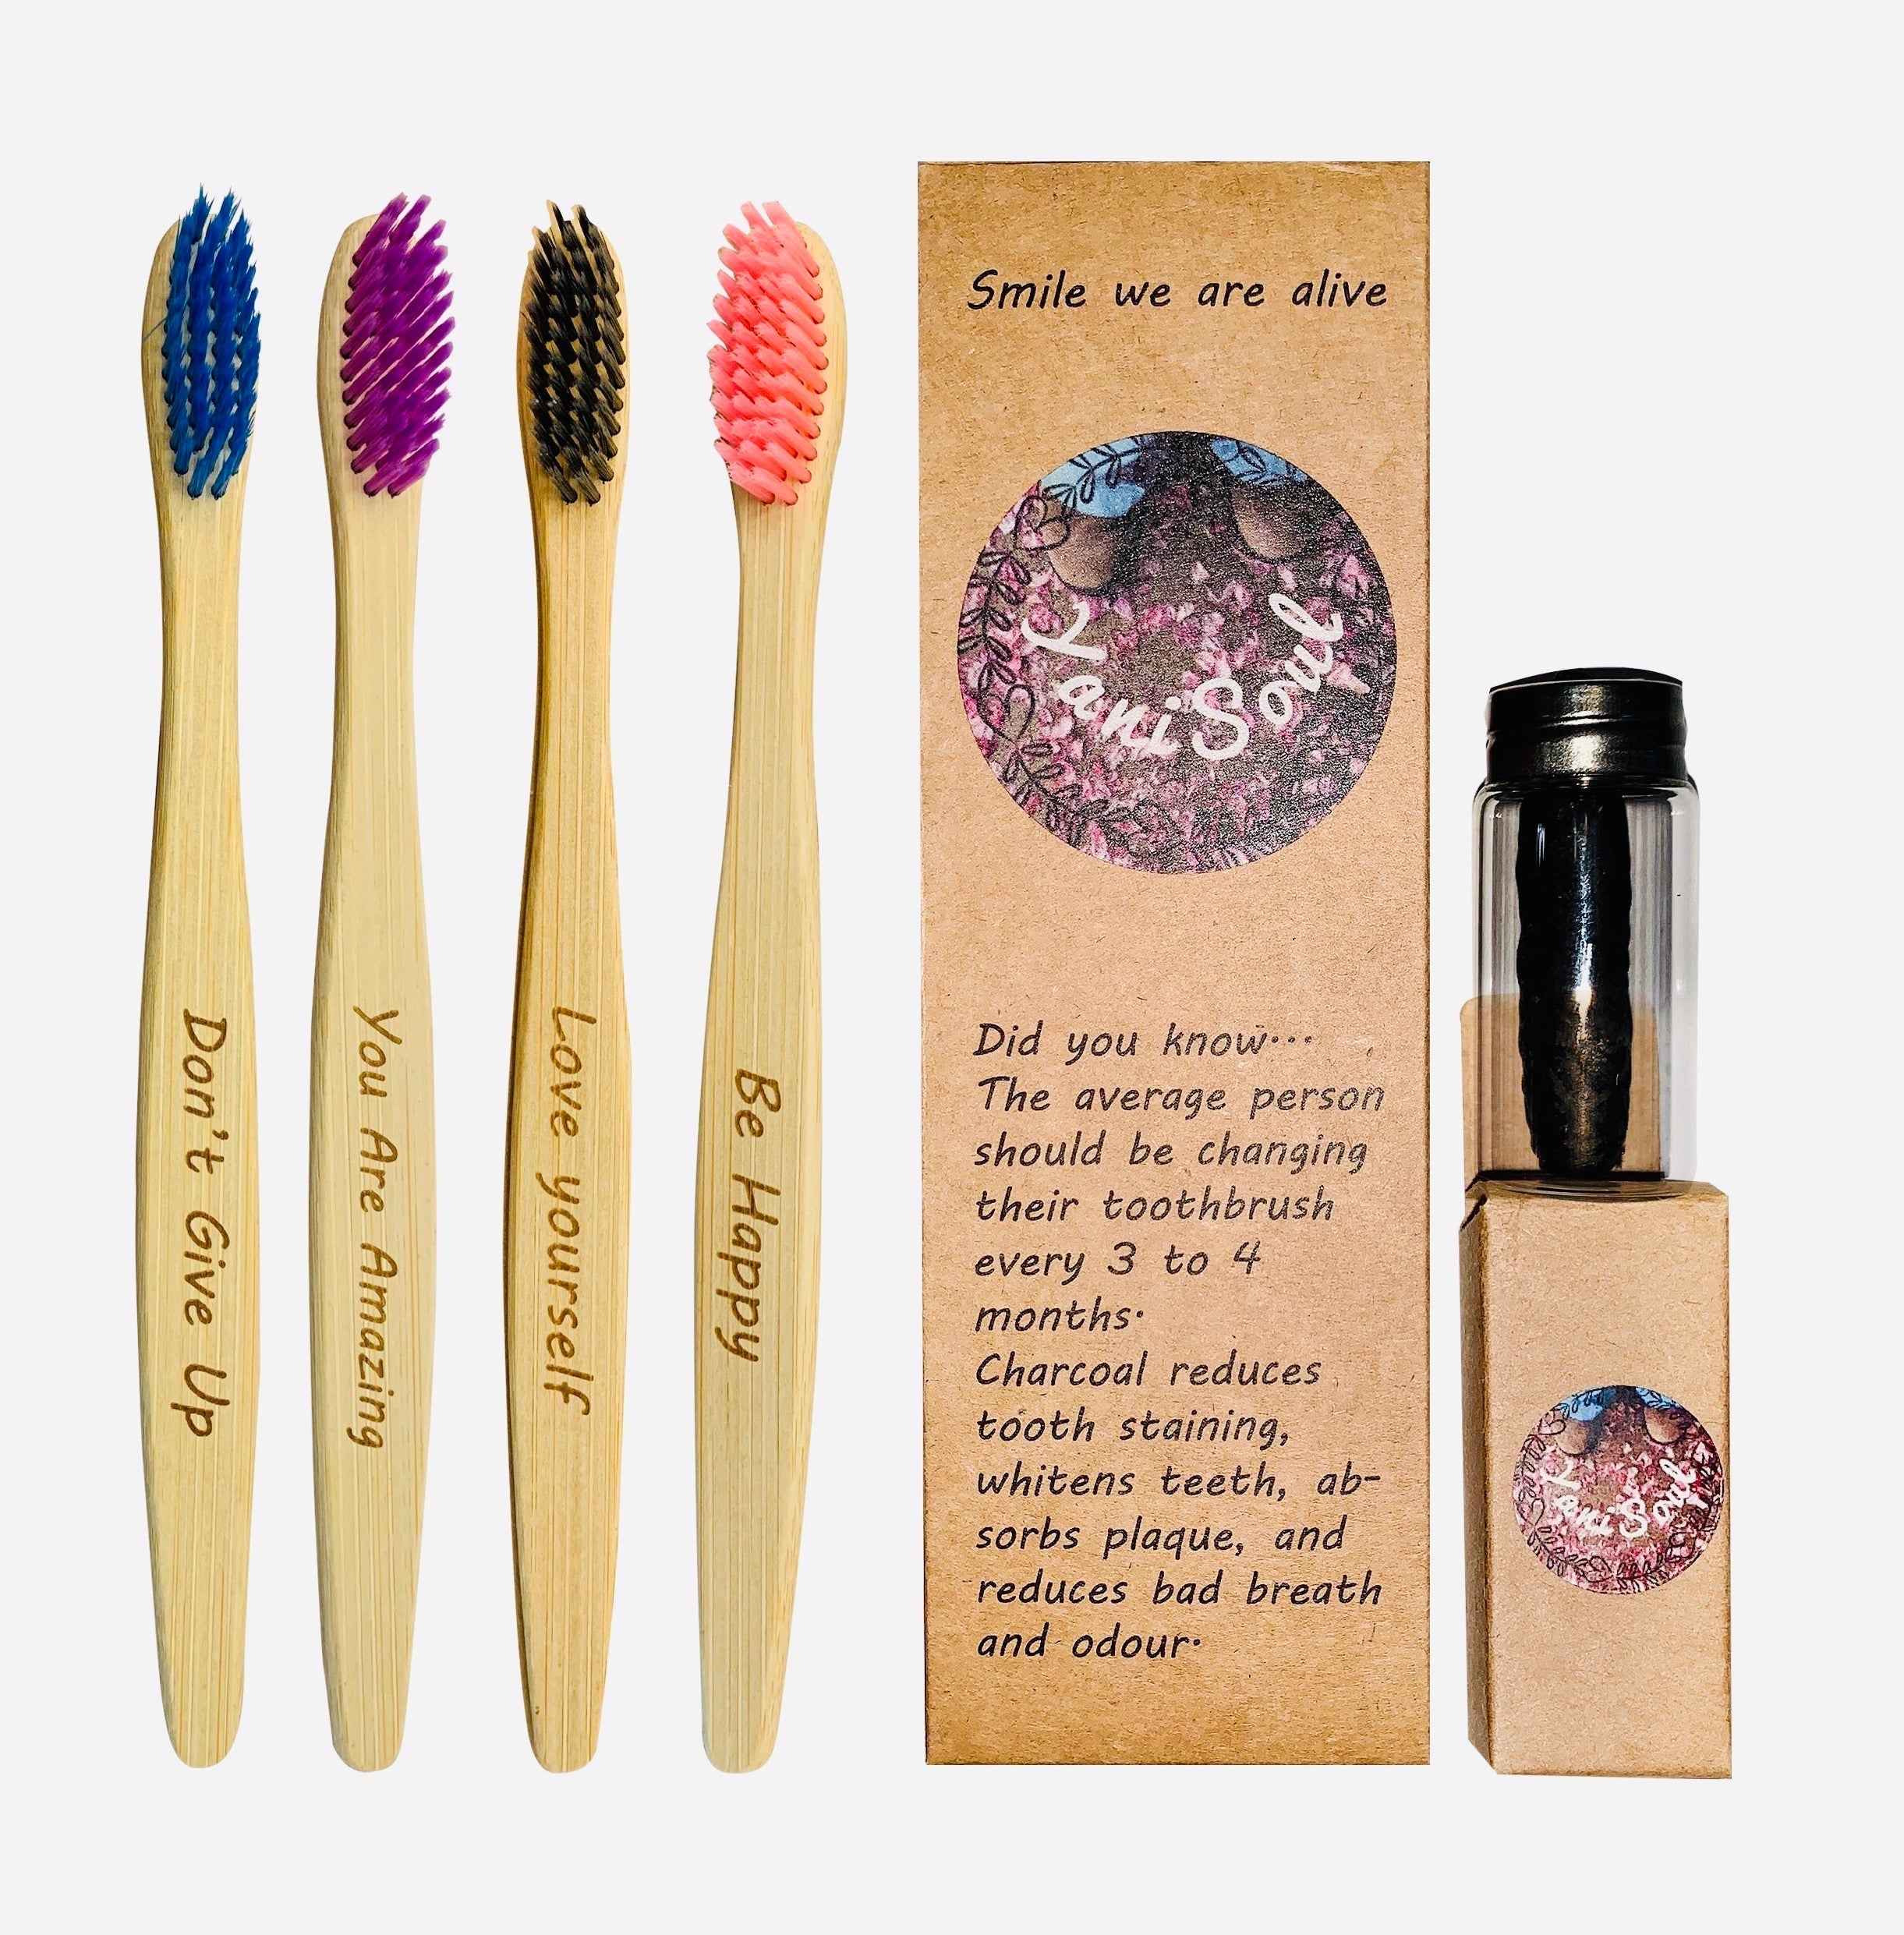 Yani Soul Motivational Biodegradable Bamboo Toothbrush Eco Friendly With Soft Bristles And Vegan Floss Included Change Your Smile, Change The World - Start your day out right with Yani Soul!